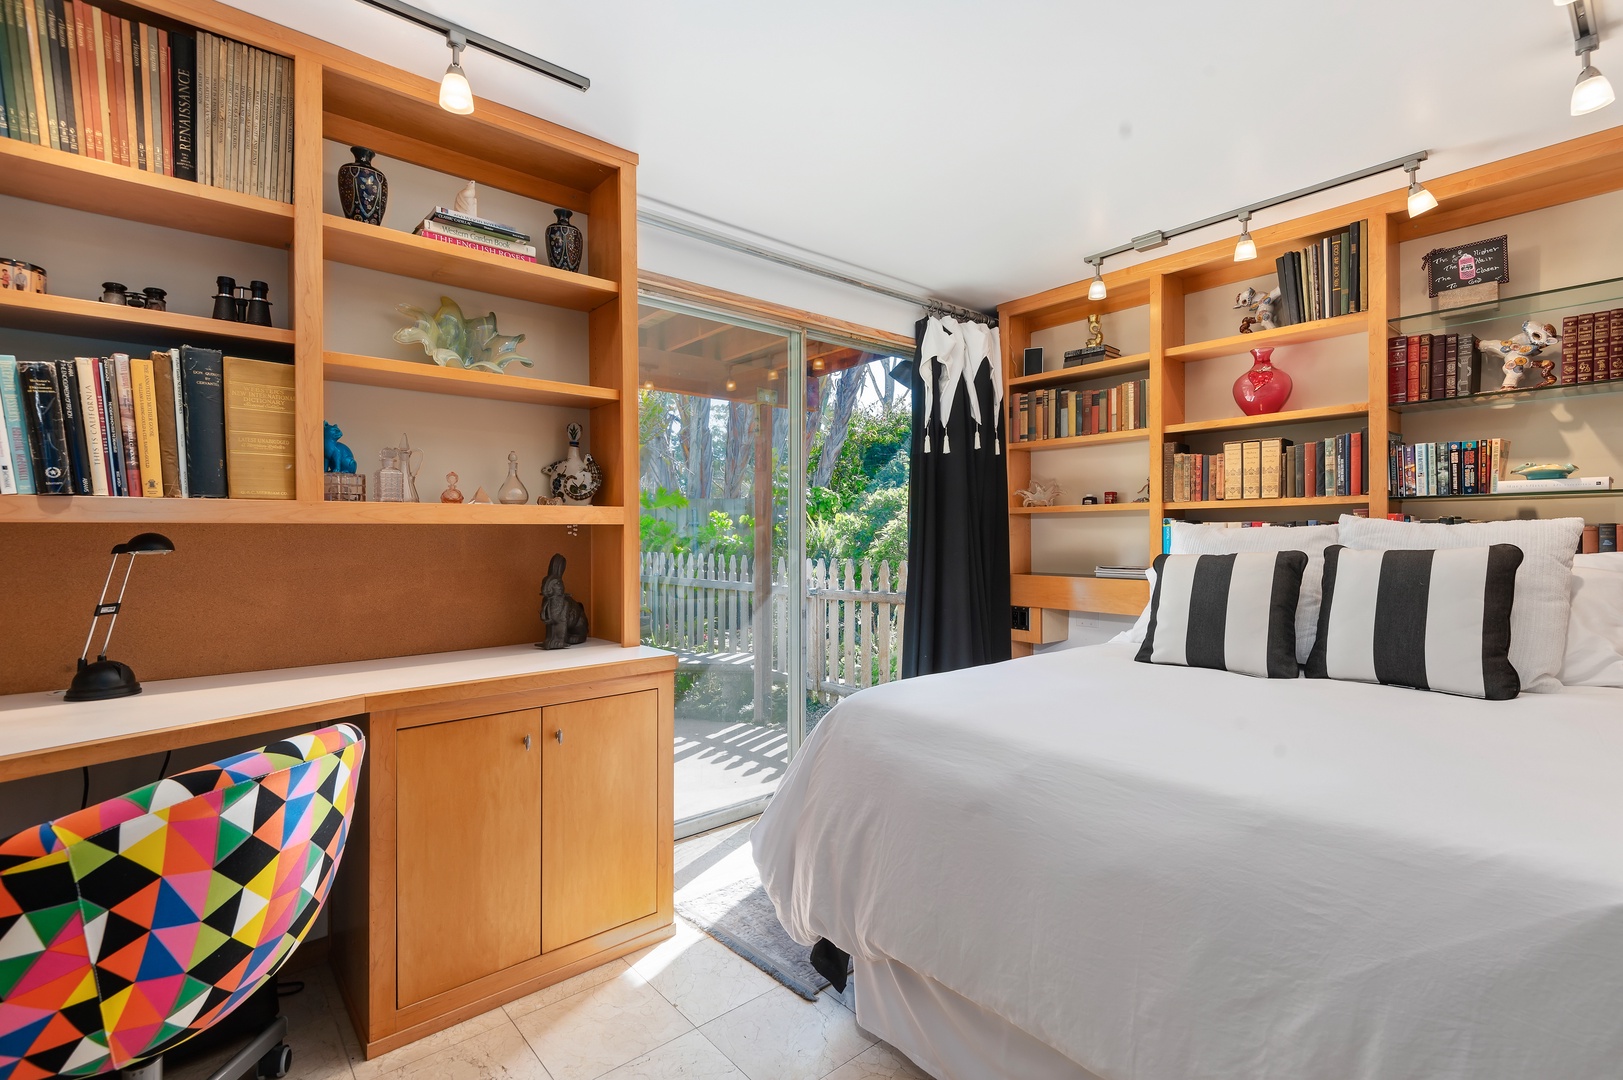 Working from home? Not a problem with this Library-Style First Floor Queen Bedroom with access to the Patio